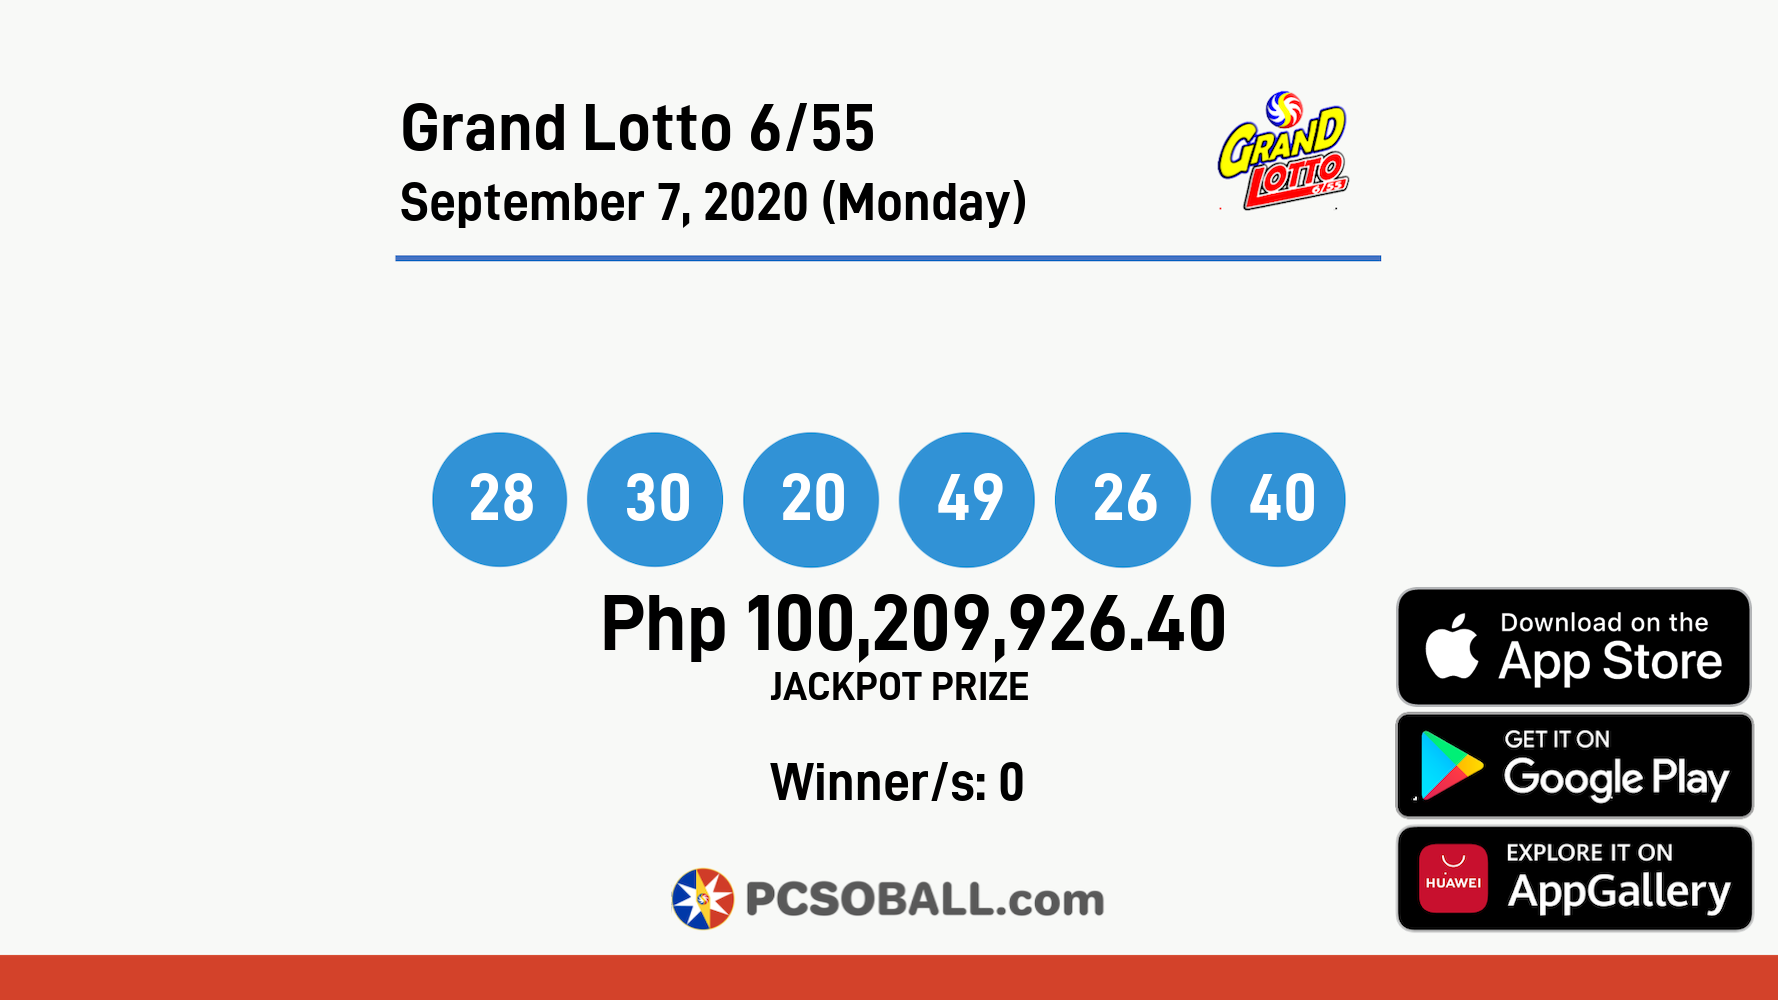 Grand Lotto 6/55 September 7, 2020 (Monday) Result